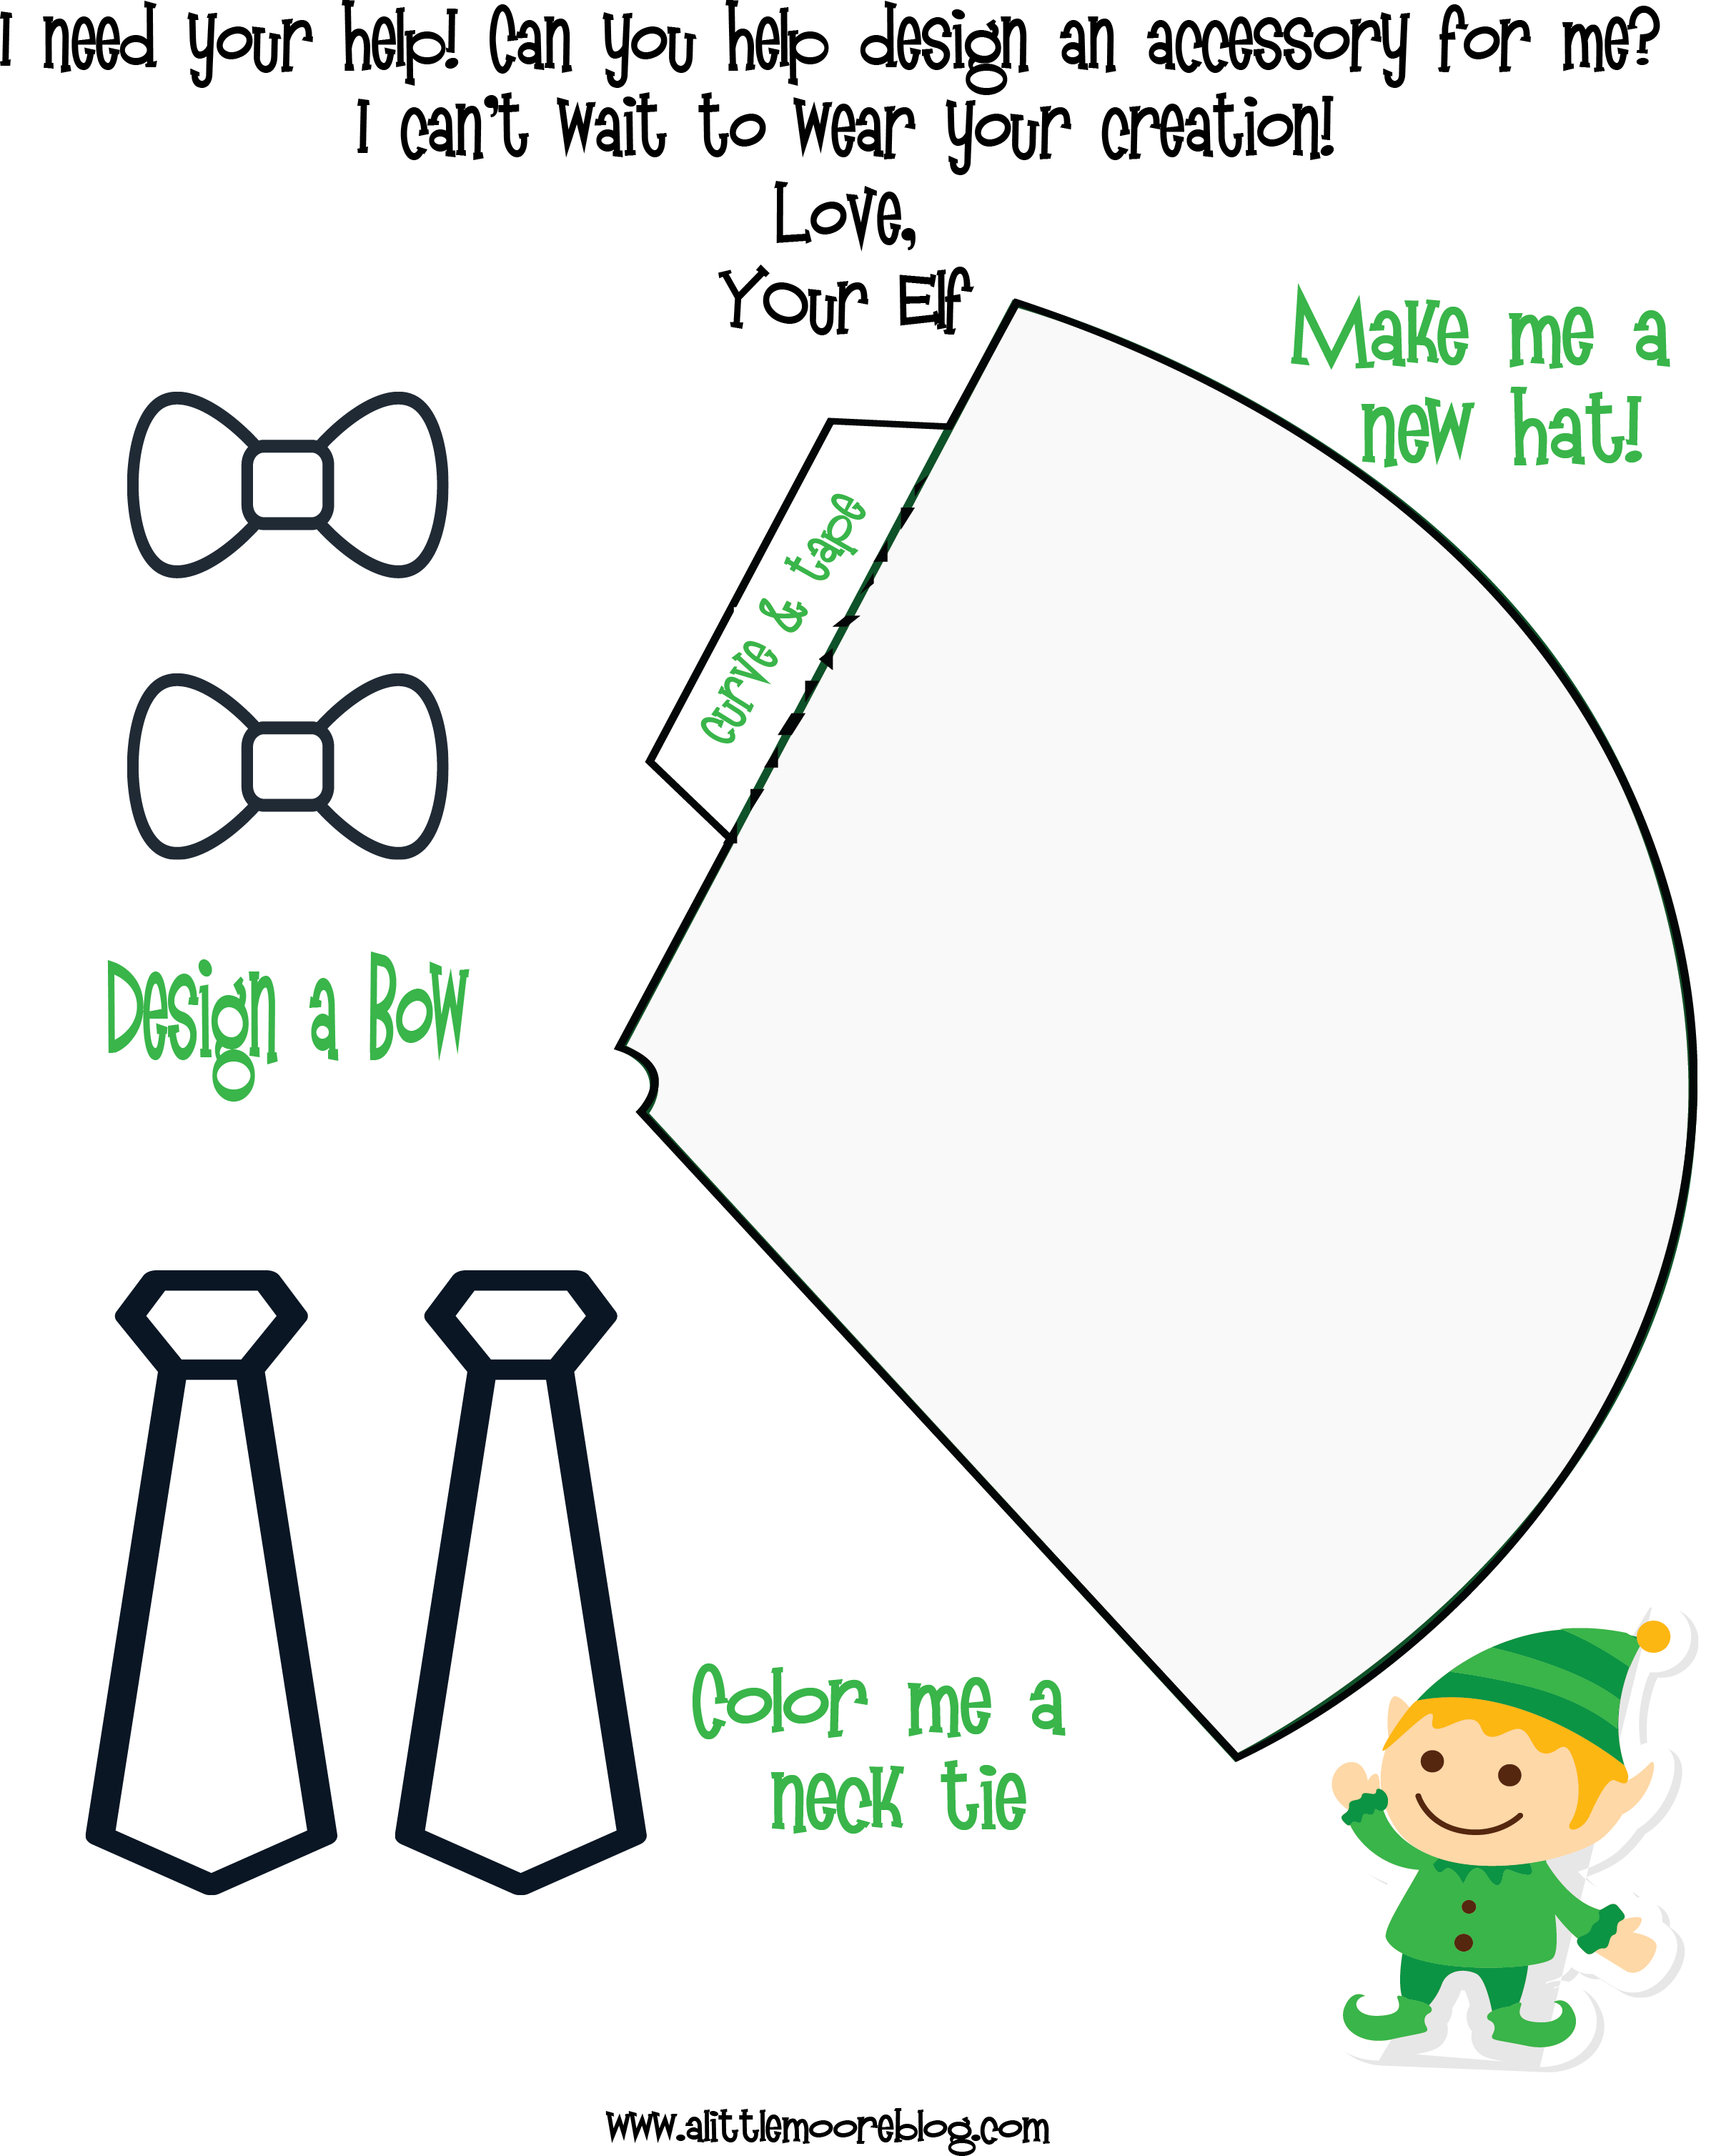 Design your own elf on the shelf accessory with a free printable